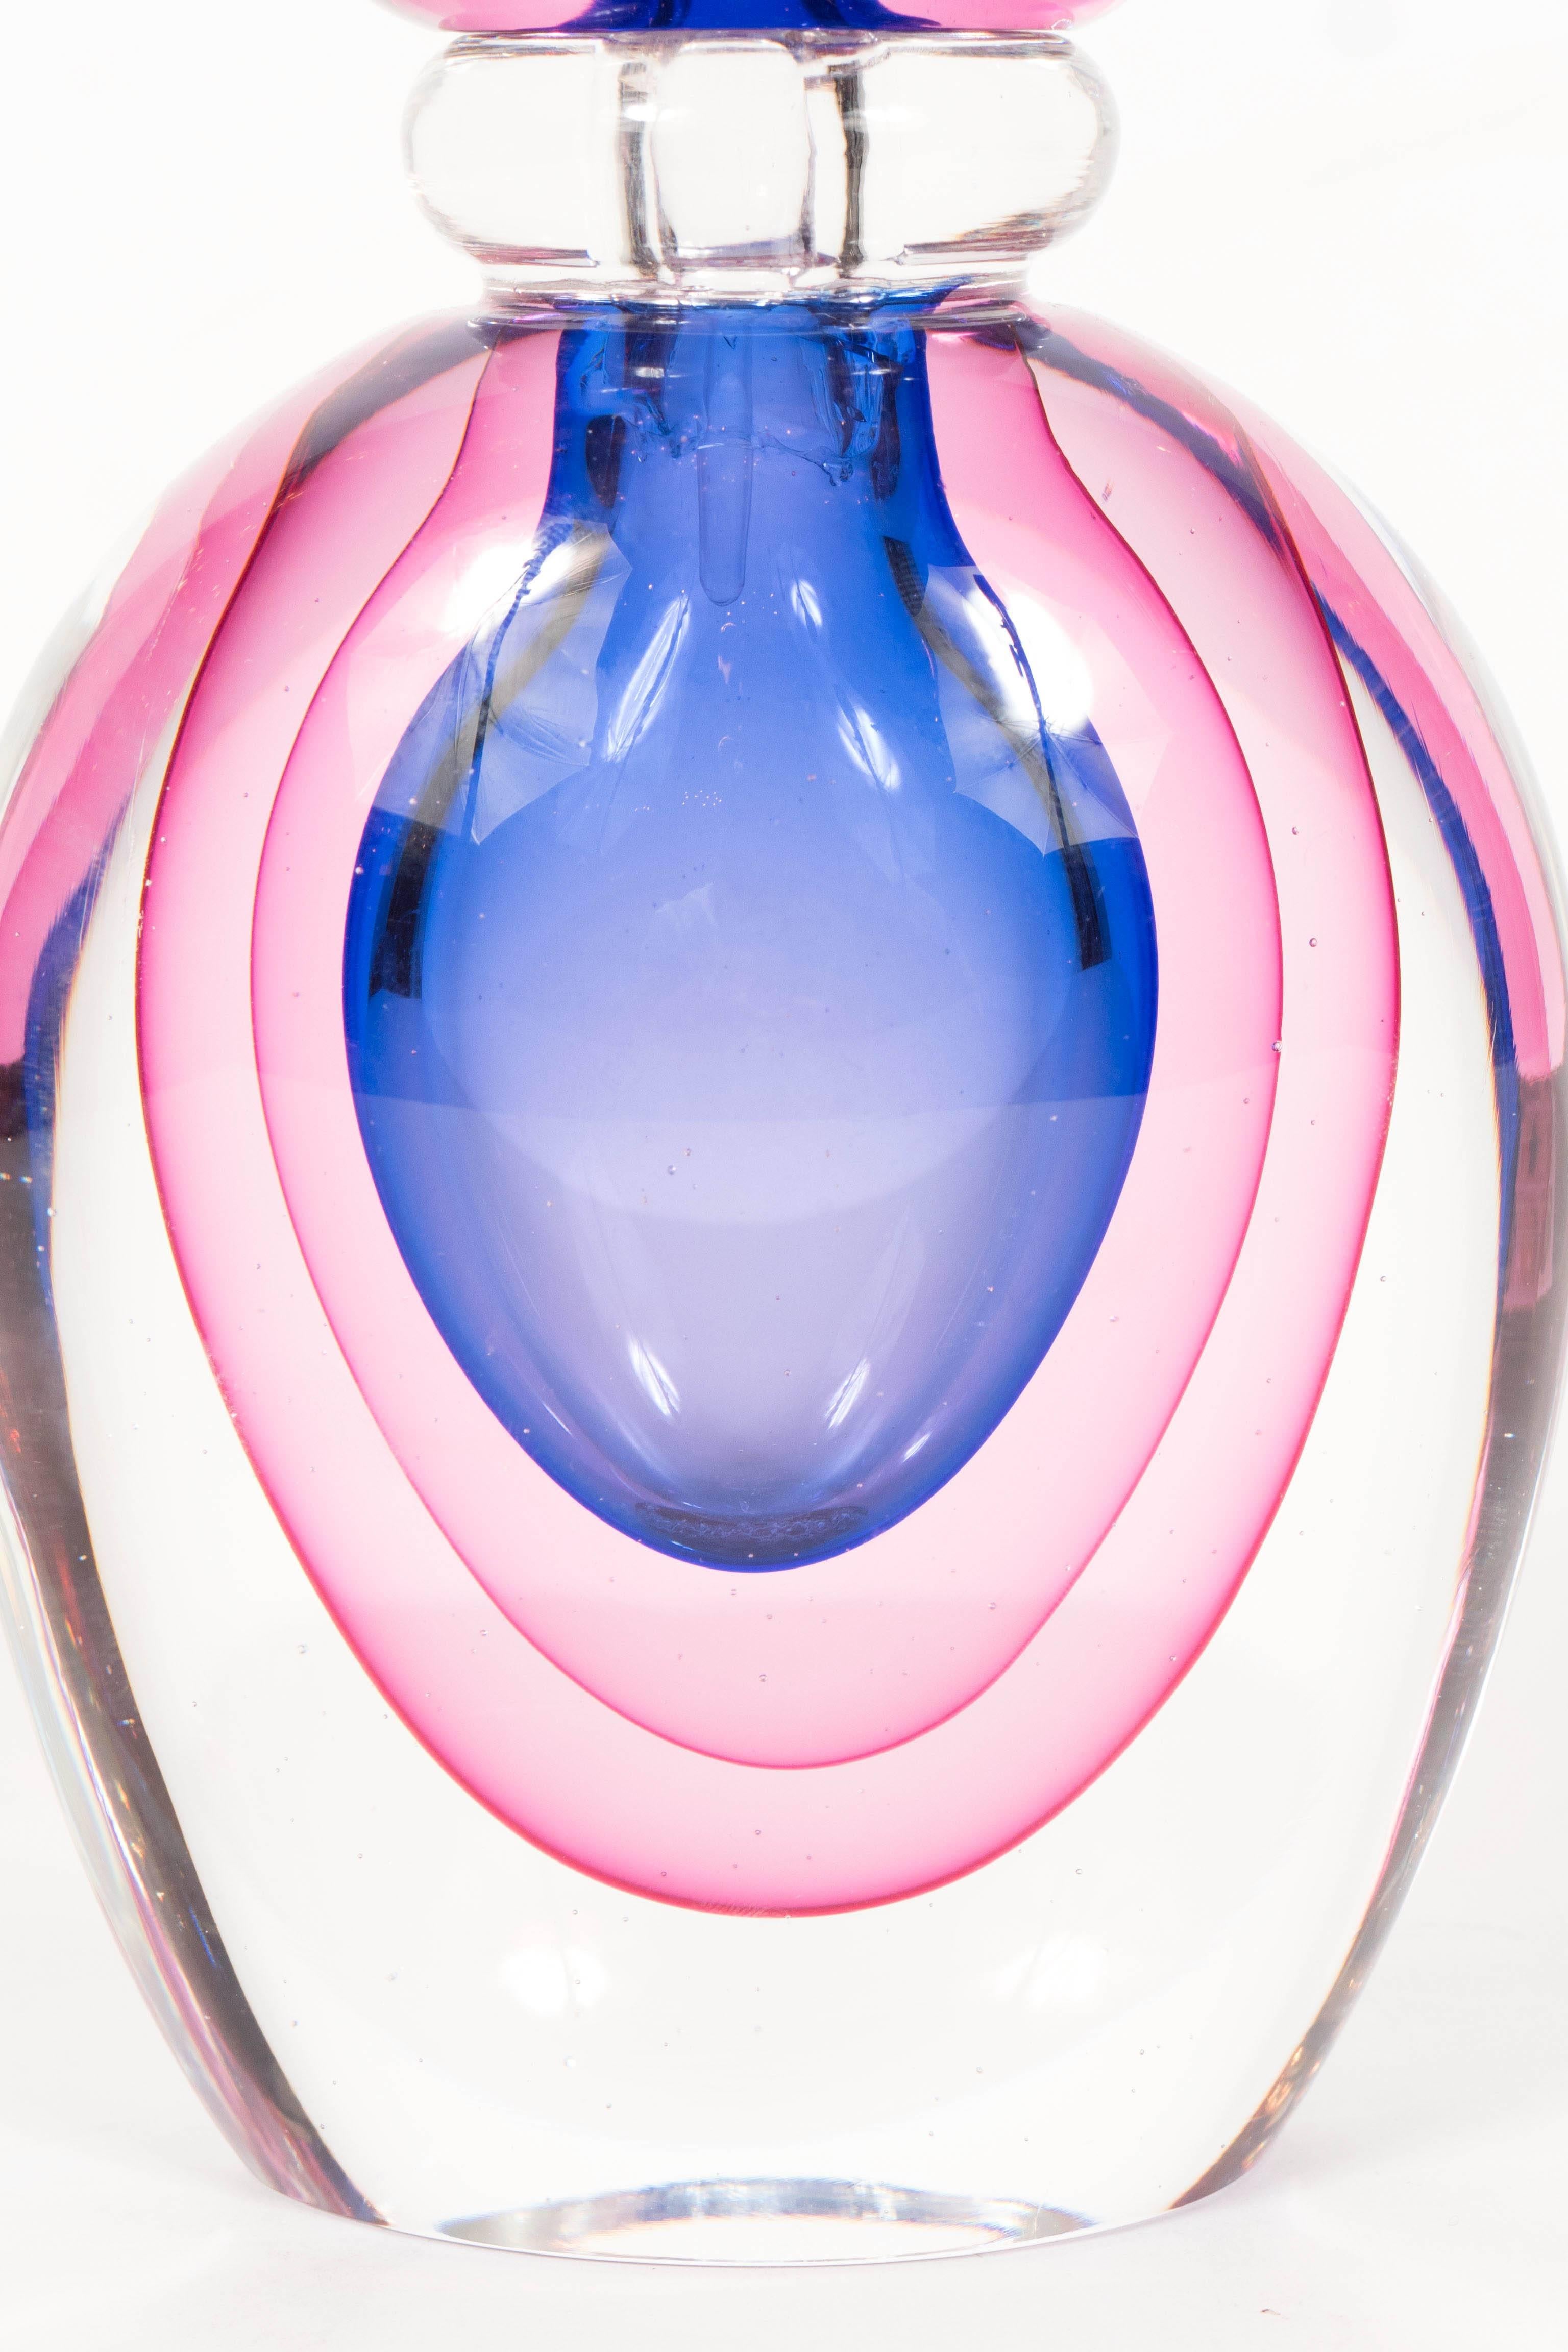 Chic Salviati Sommerso Murano perfume bottle in blue, pink and clear glass. Layers of handblown glass are displayed in this oversized perfume bottle. Its top, which displays the same layers of color has an attached glass perfume applicator. This